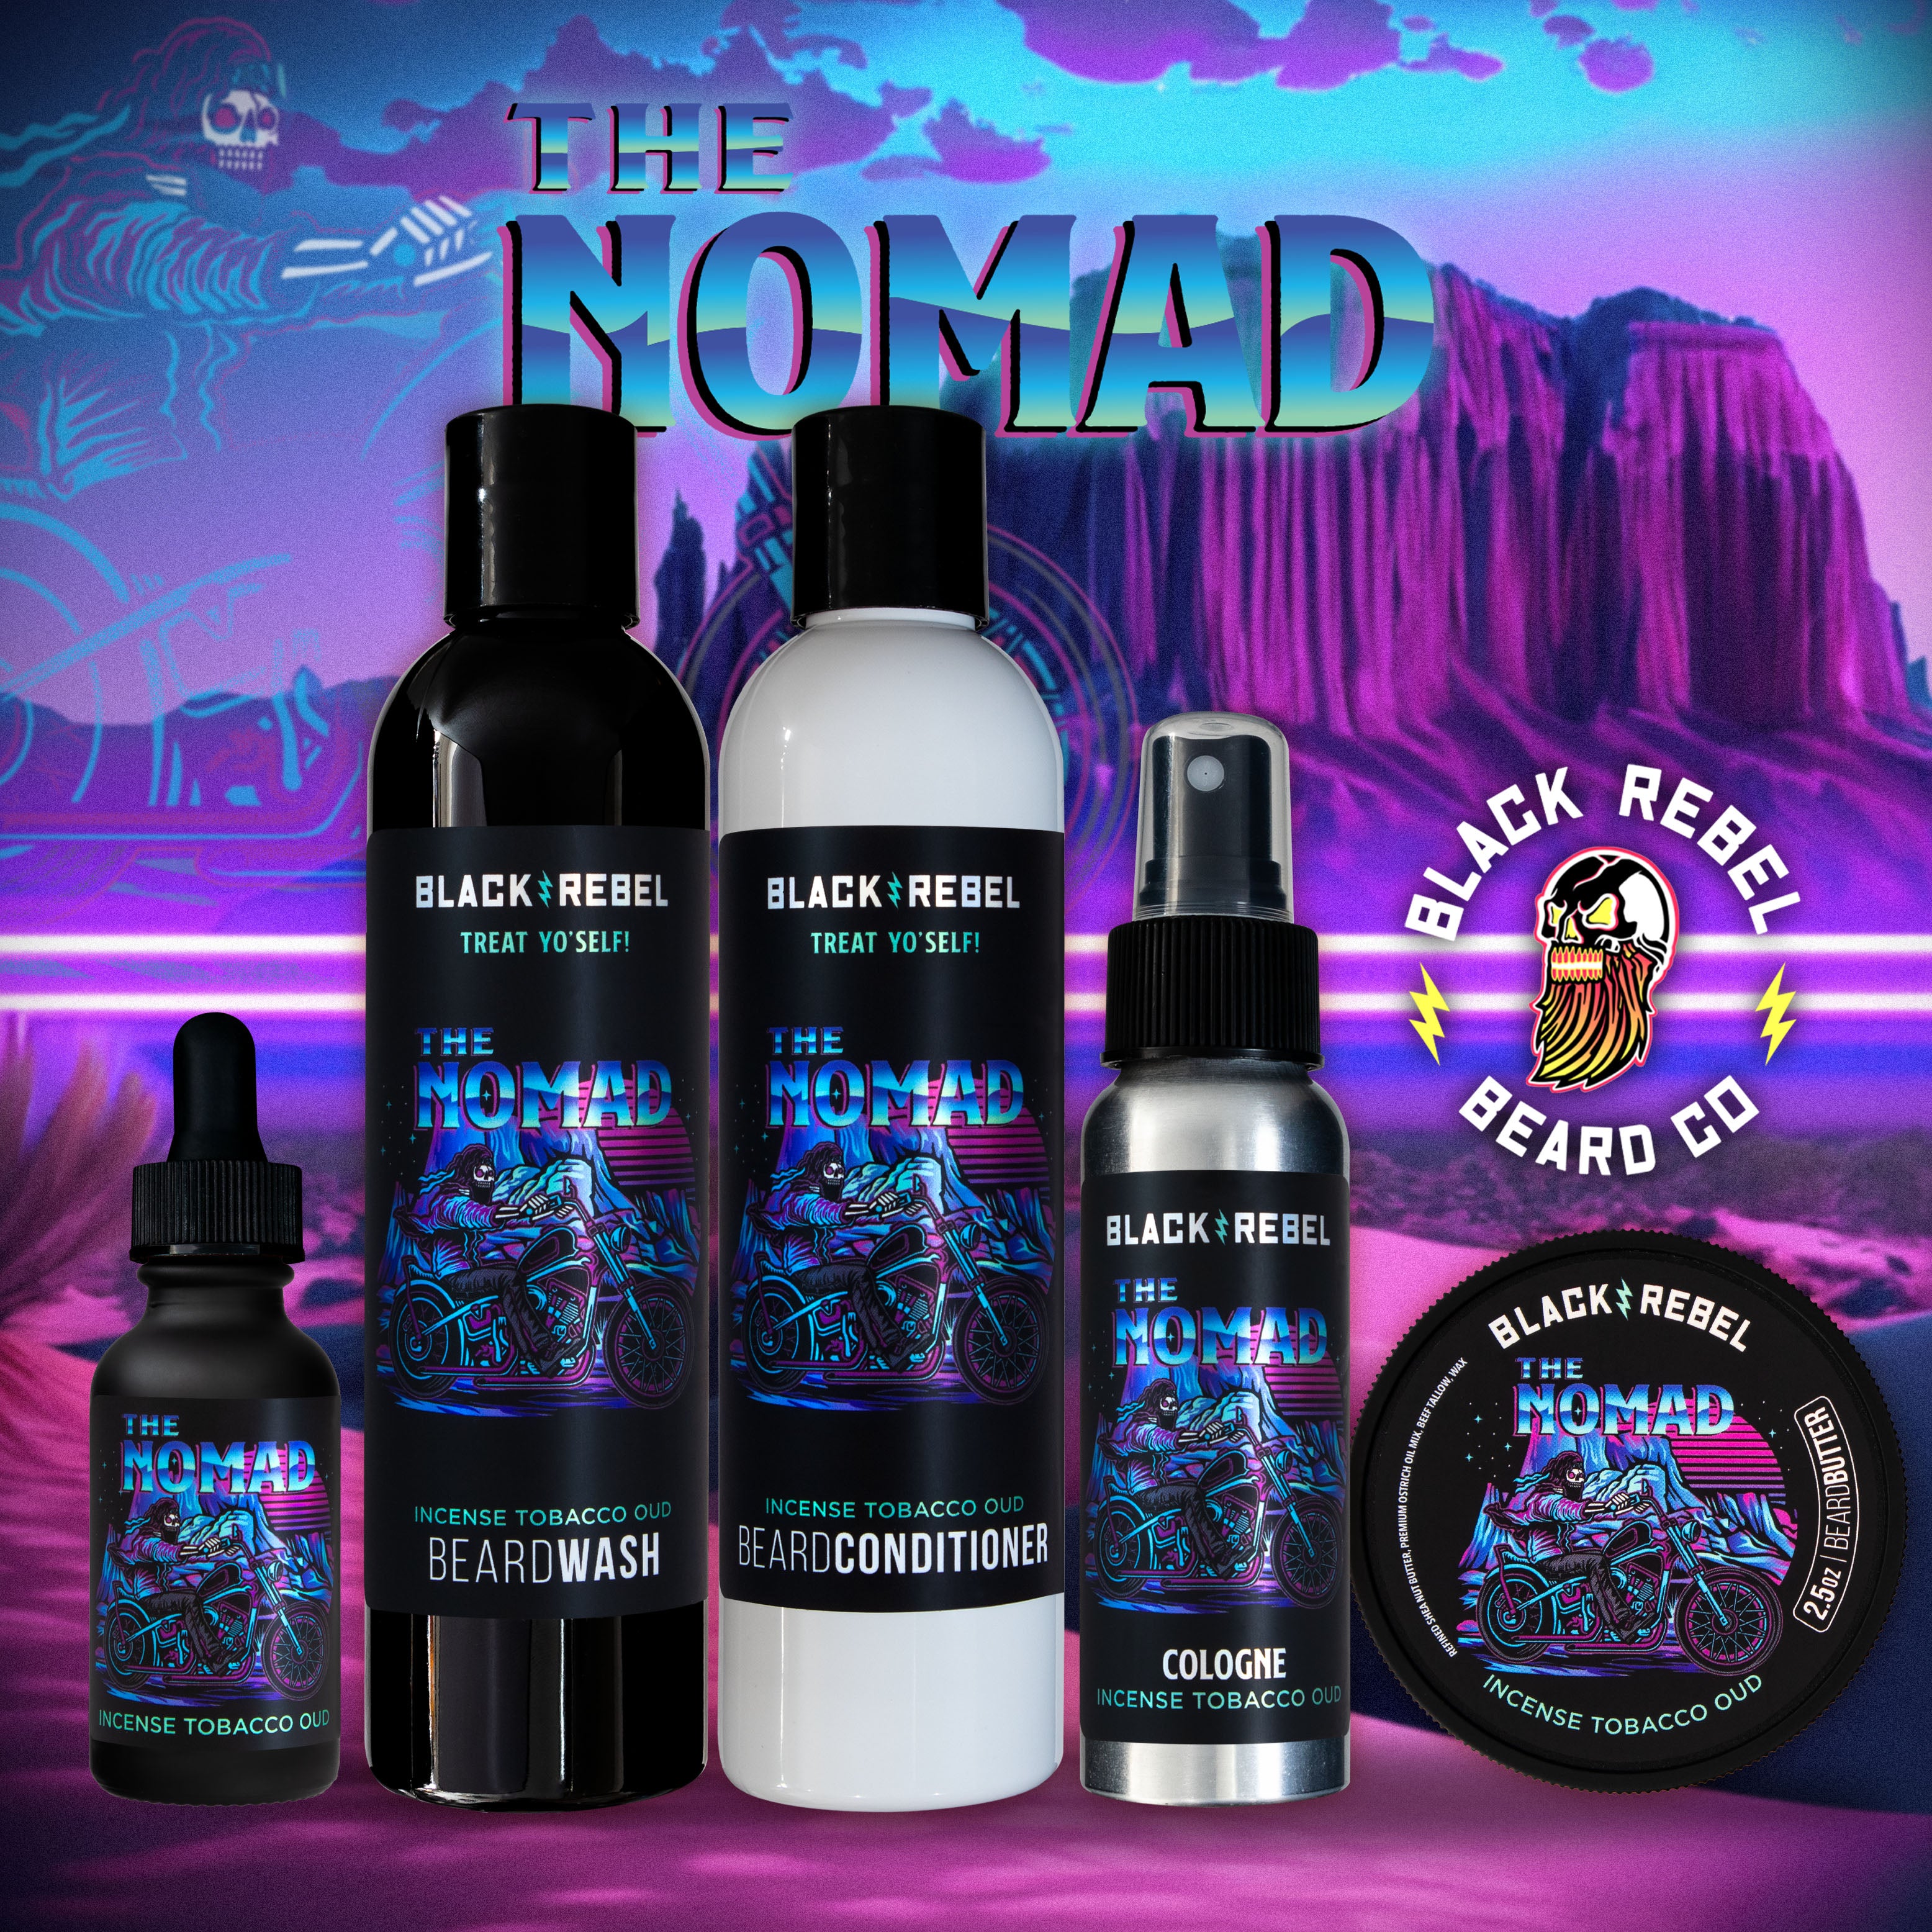 THE NOMAD (incense tobacco oud)